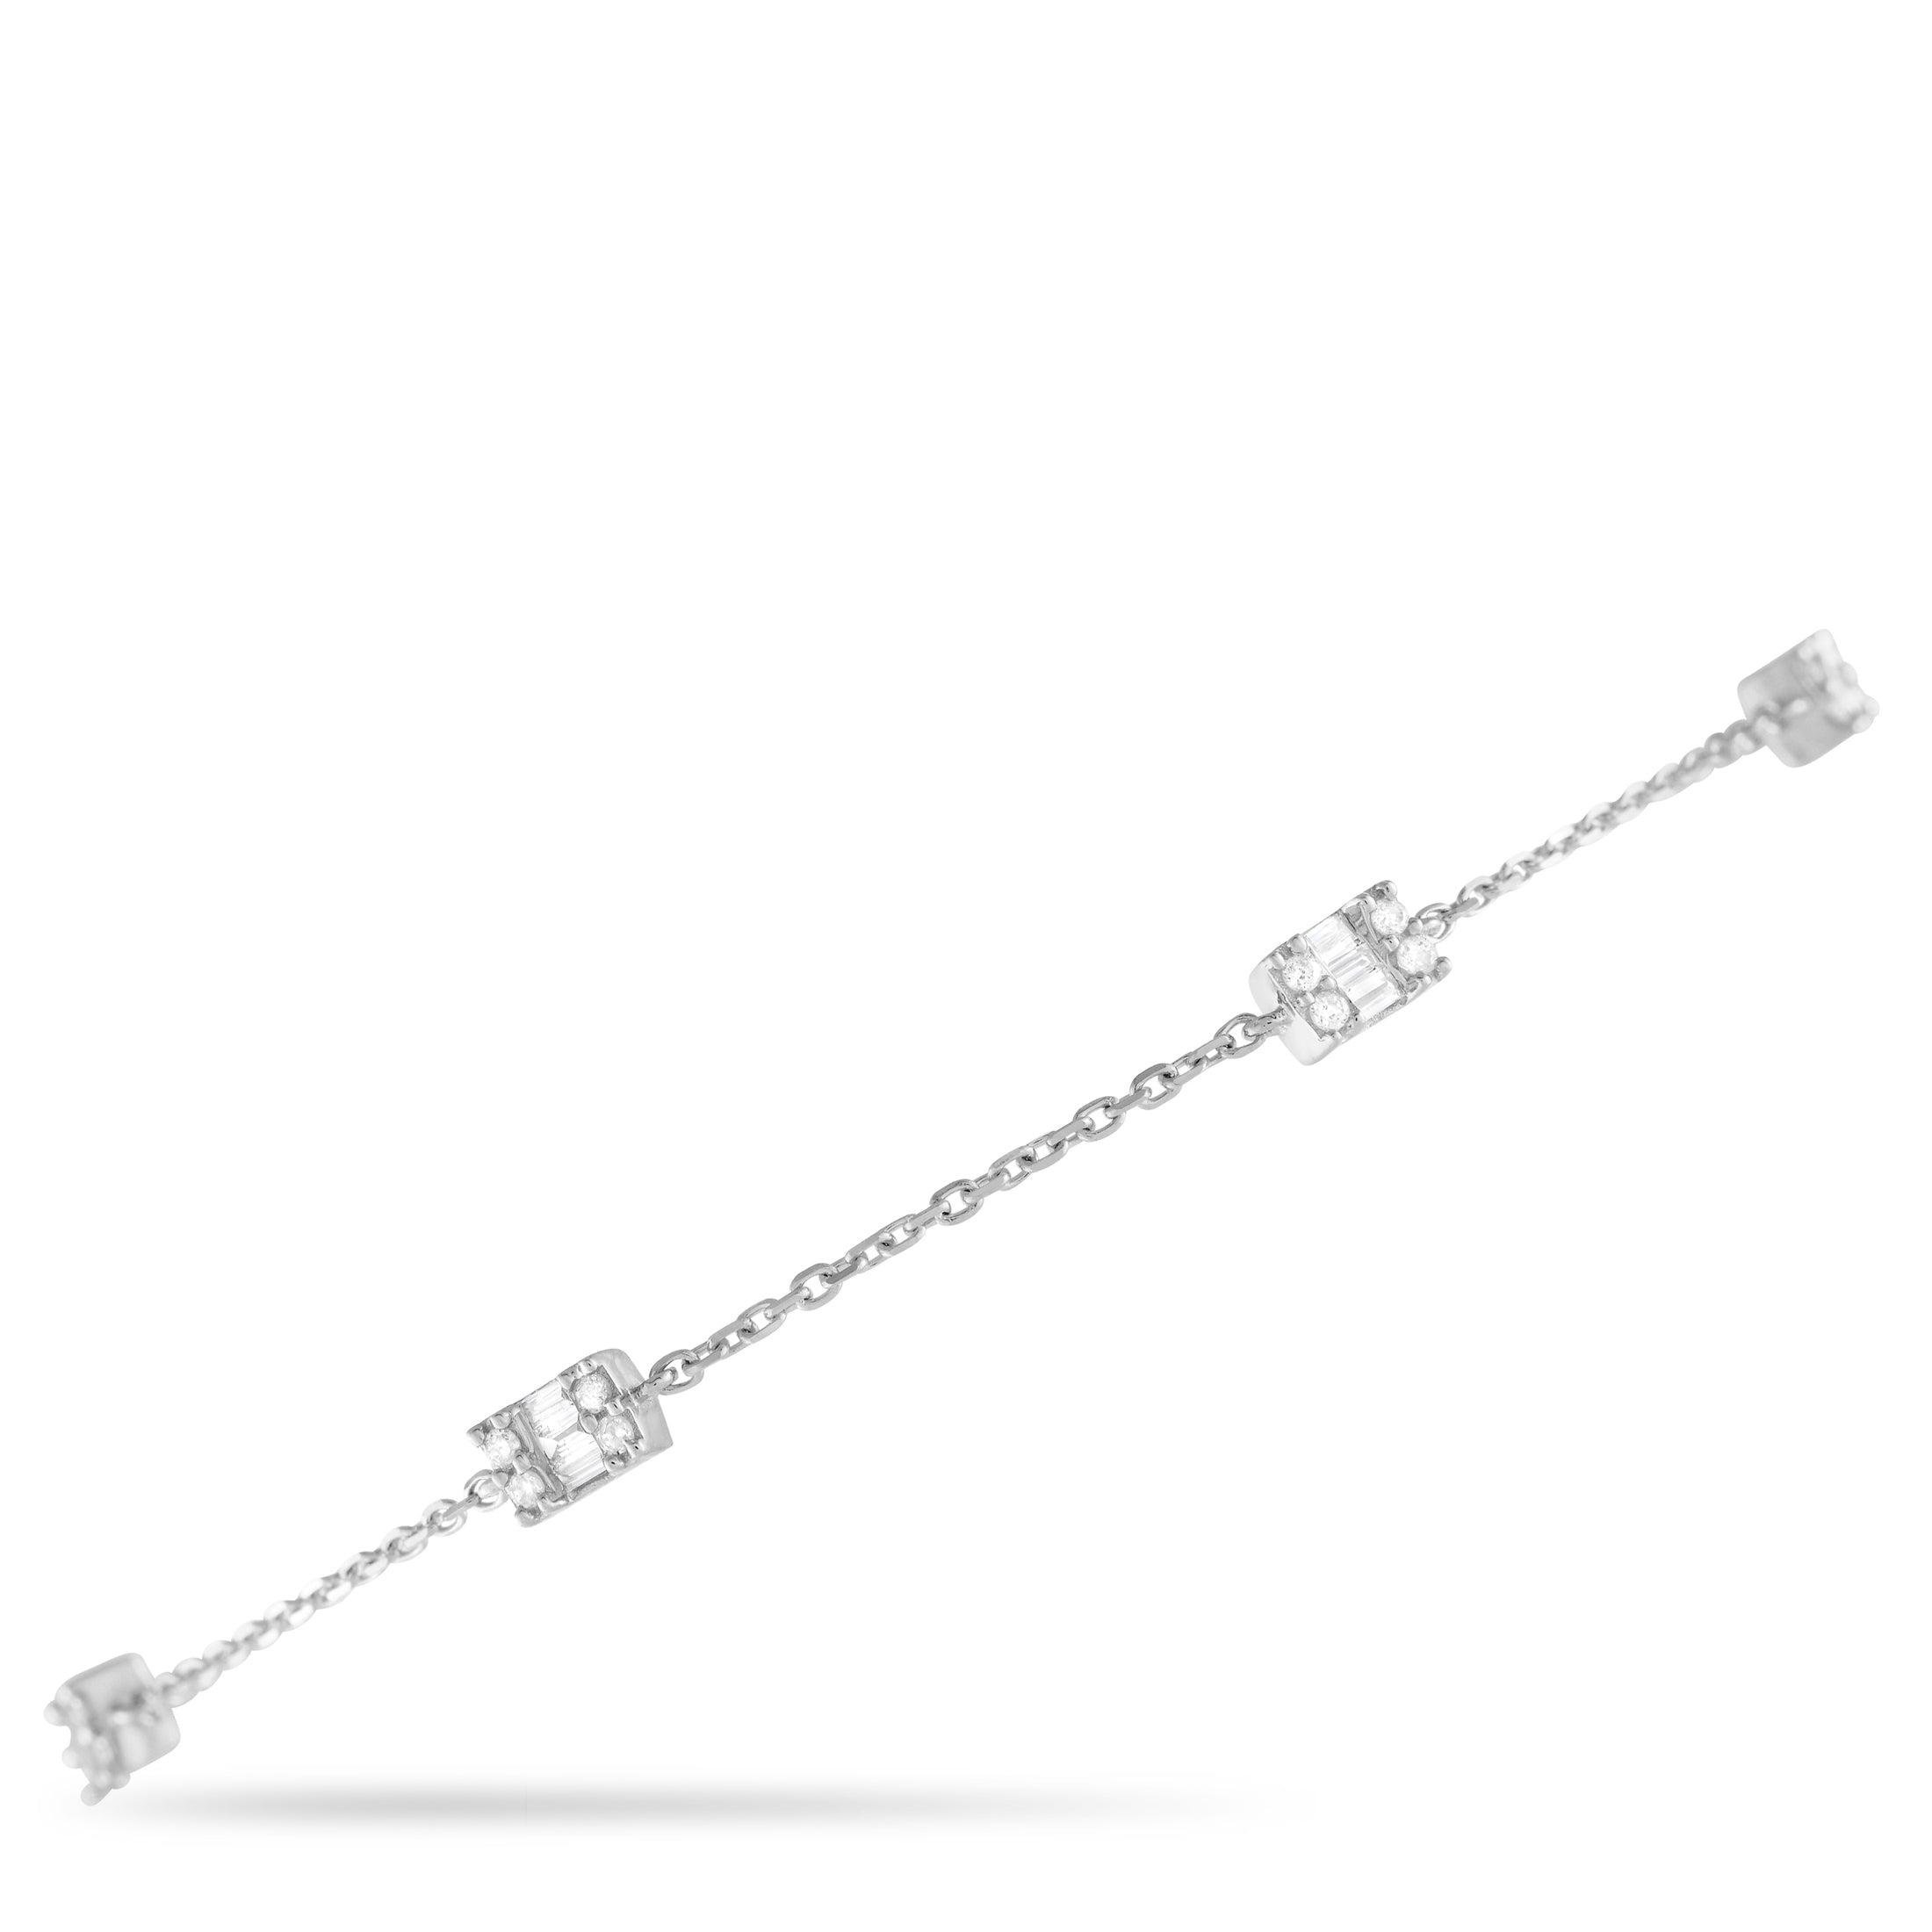 LB Exclusive 14K White Gold 0.25ct Diamond Station Bracelet  BR09823-W by NON BRANDED